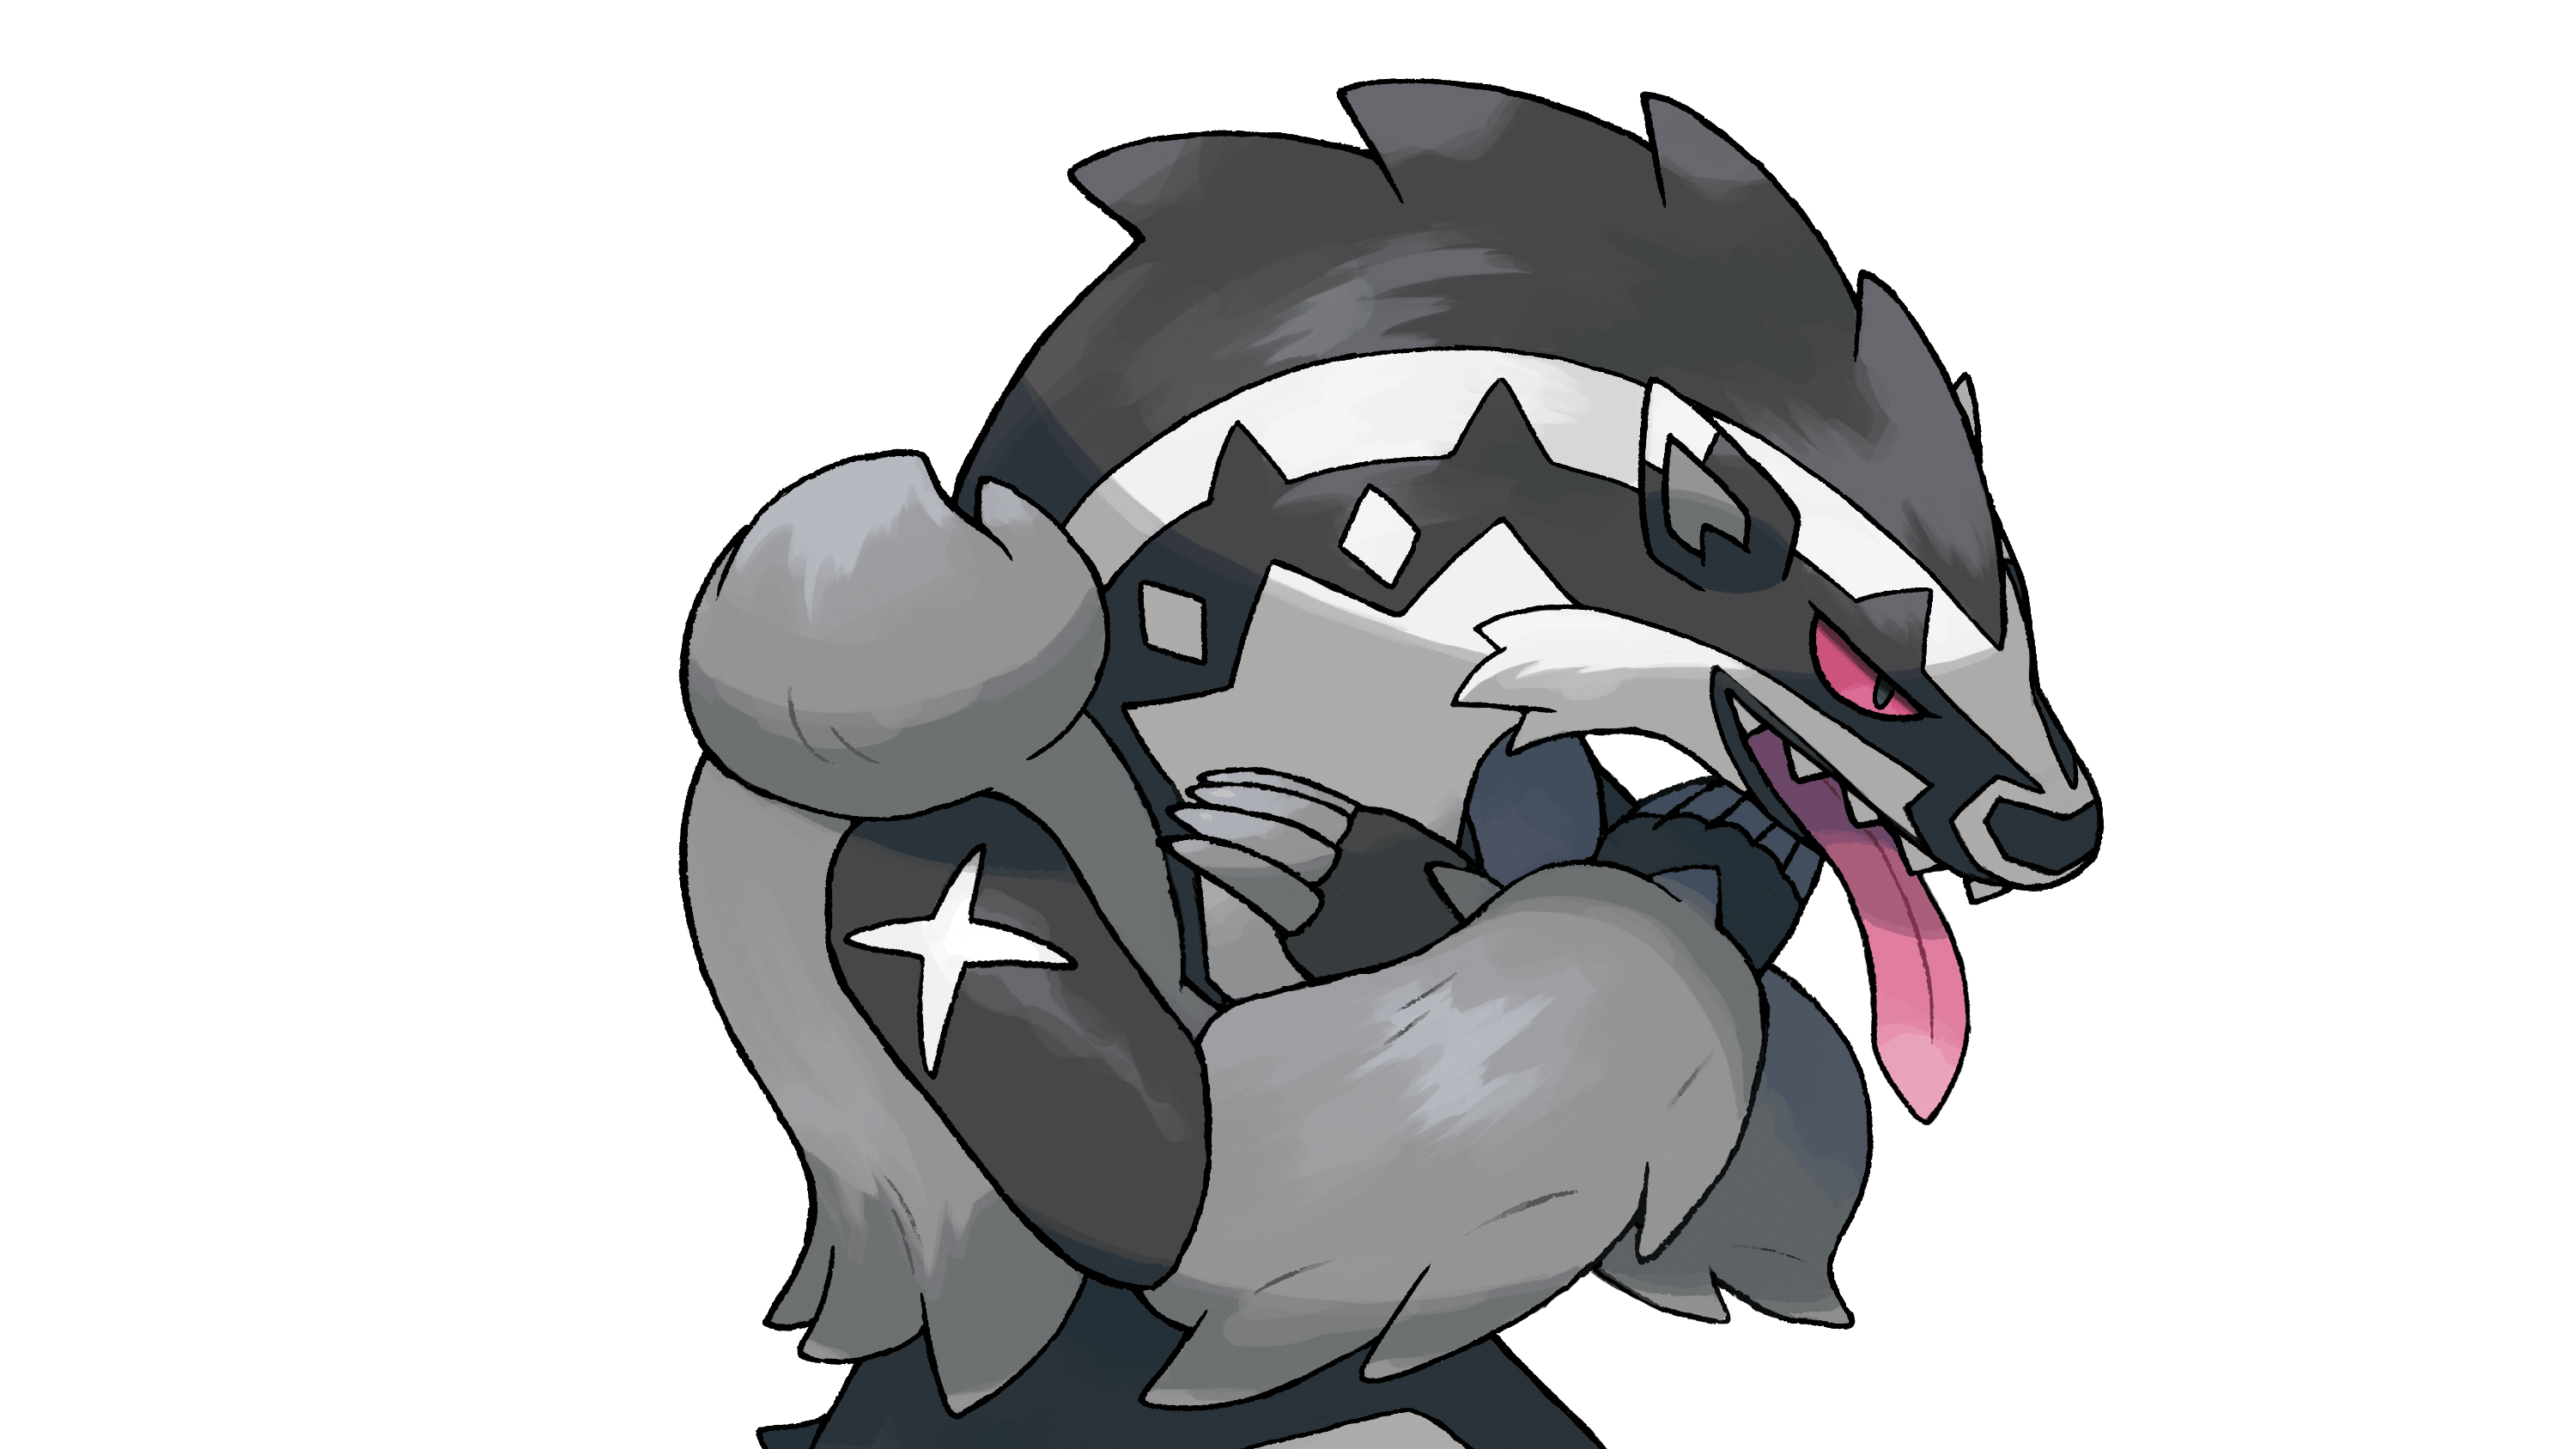 Linoone's Galar evolution Obstagoon is basically a member